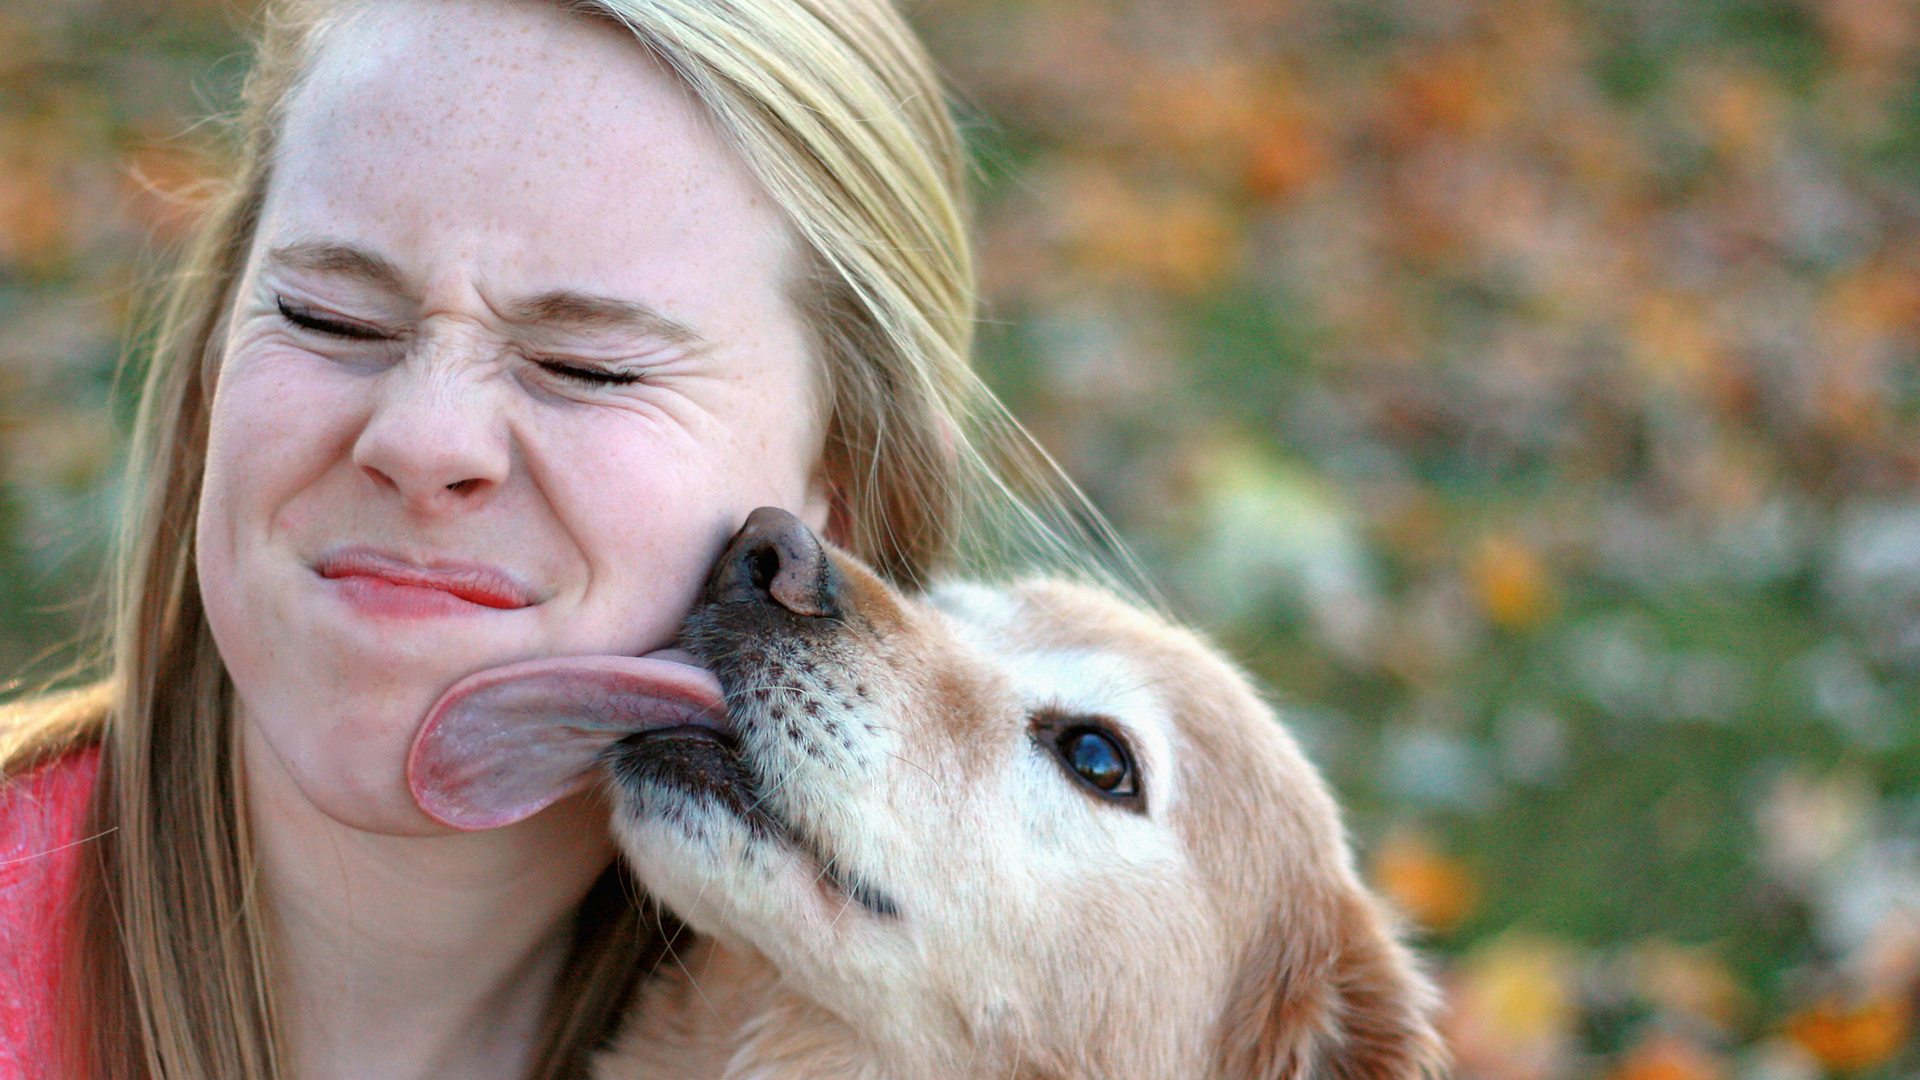 BBC Scotland - BBC Scotland - Should you stop kissing your dog on the mouth?